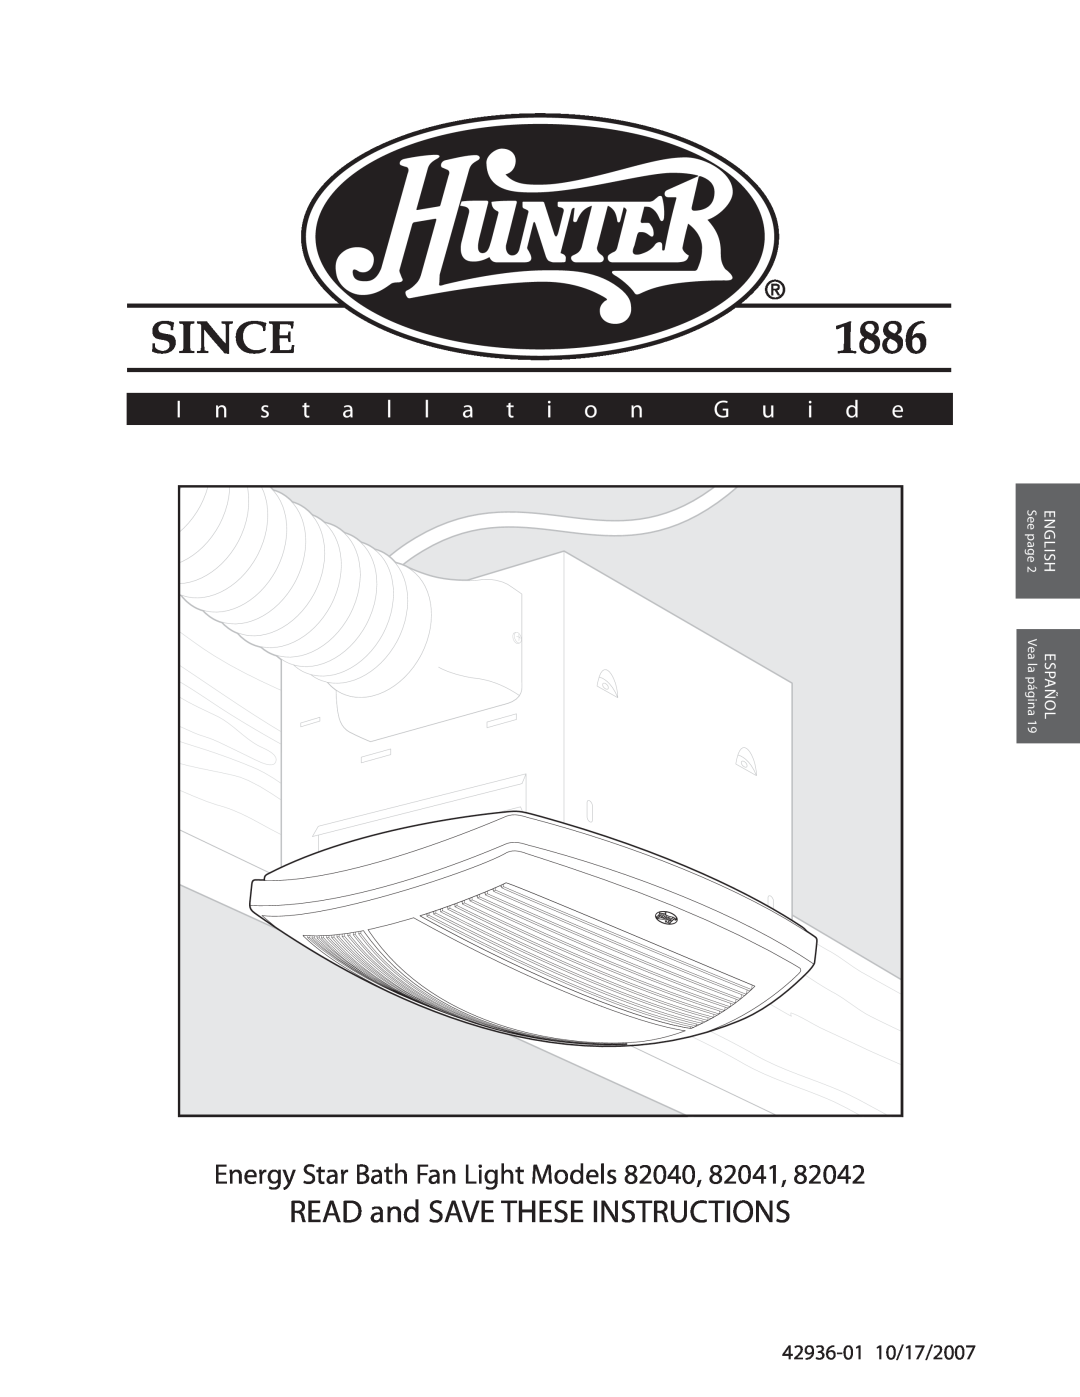 Hunter Fan 82042, 82041, 82040 manual READ and SAVE THESE INSTRUCTIONS, Energy Star Bath Fan Light Models 